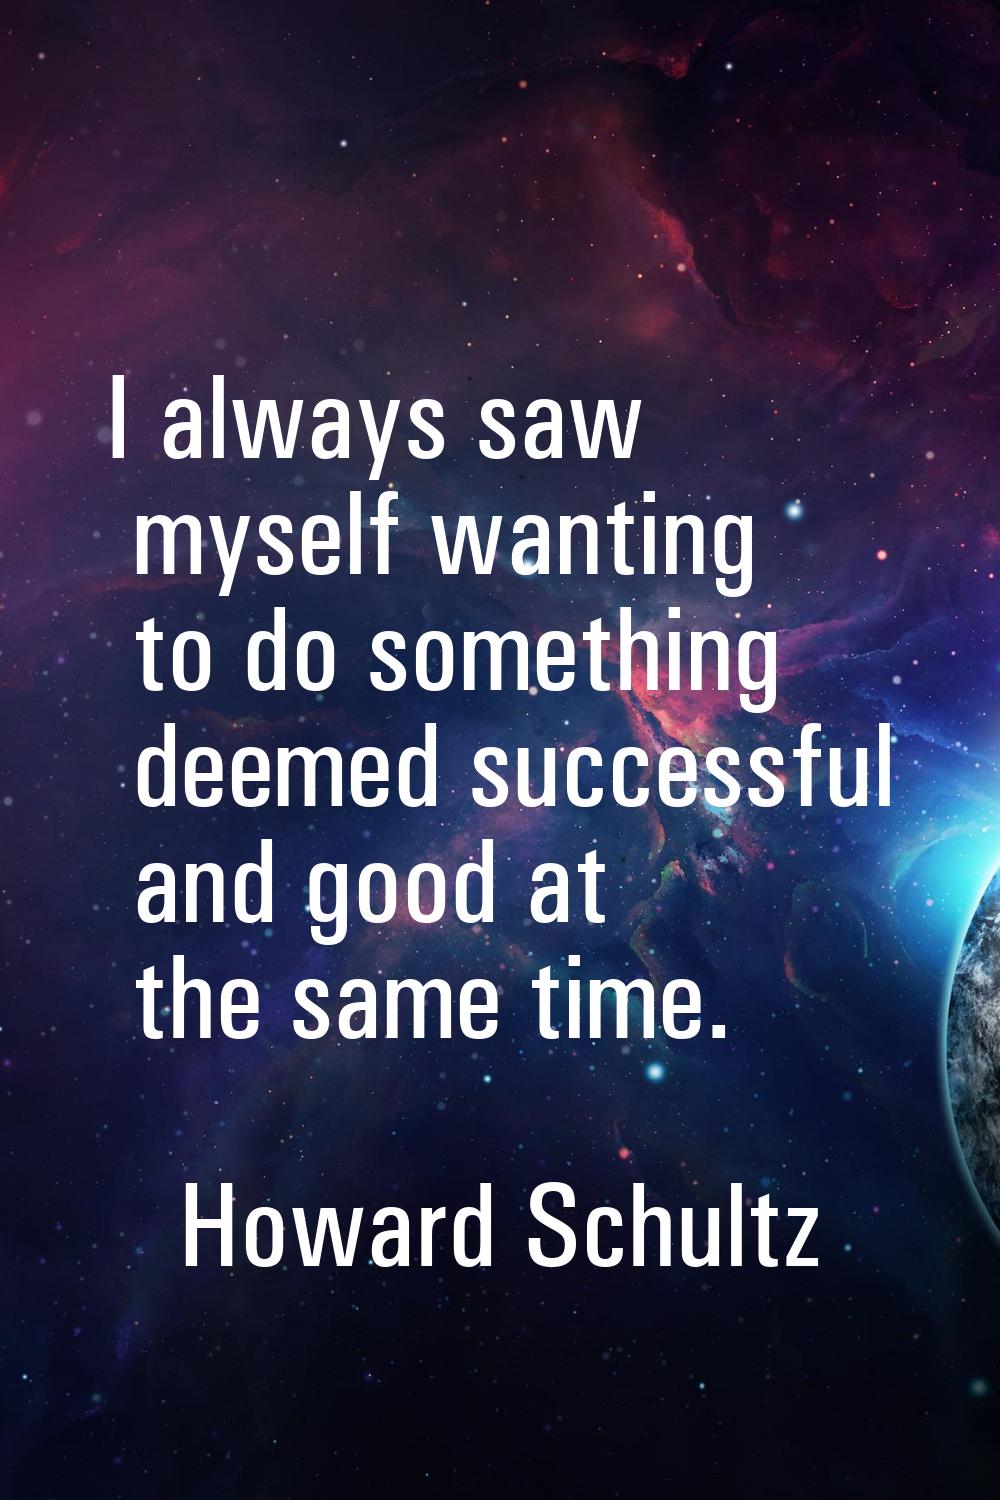 I always saw myself wanting to do something deemed successful and good at the same time.